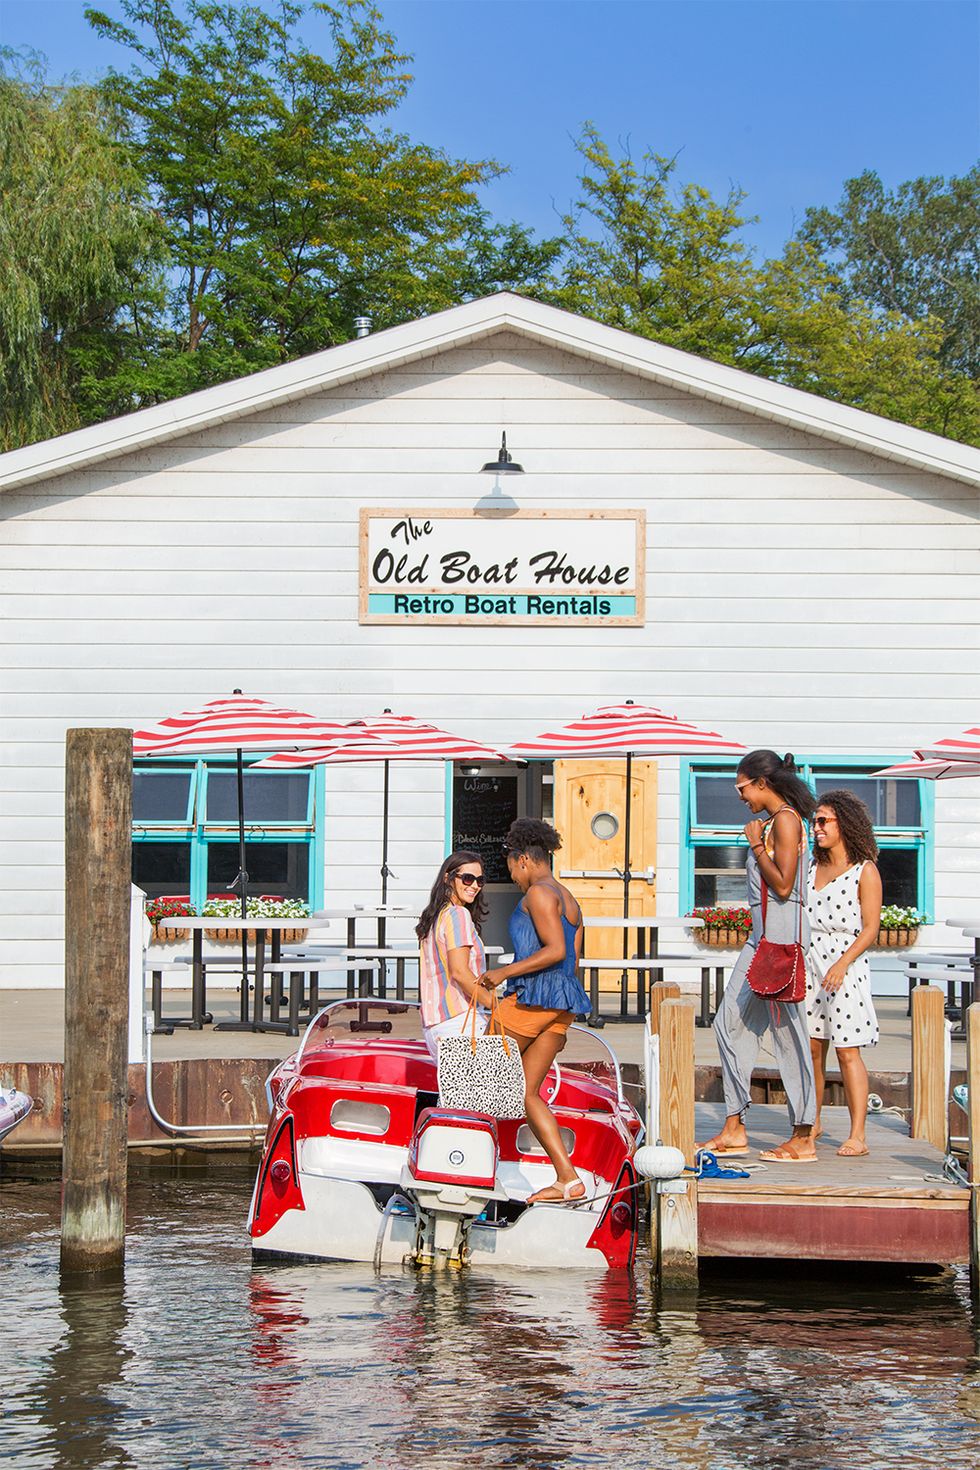 group of women boarding a red vintage speedboat at the dock of retro boat rentals in saugatuck michigan